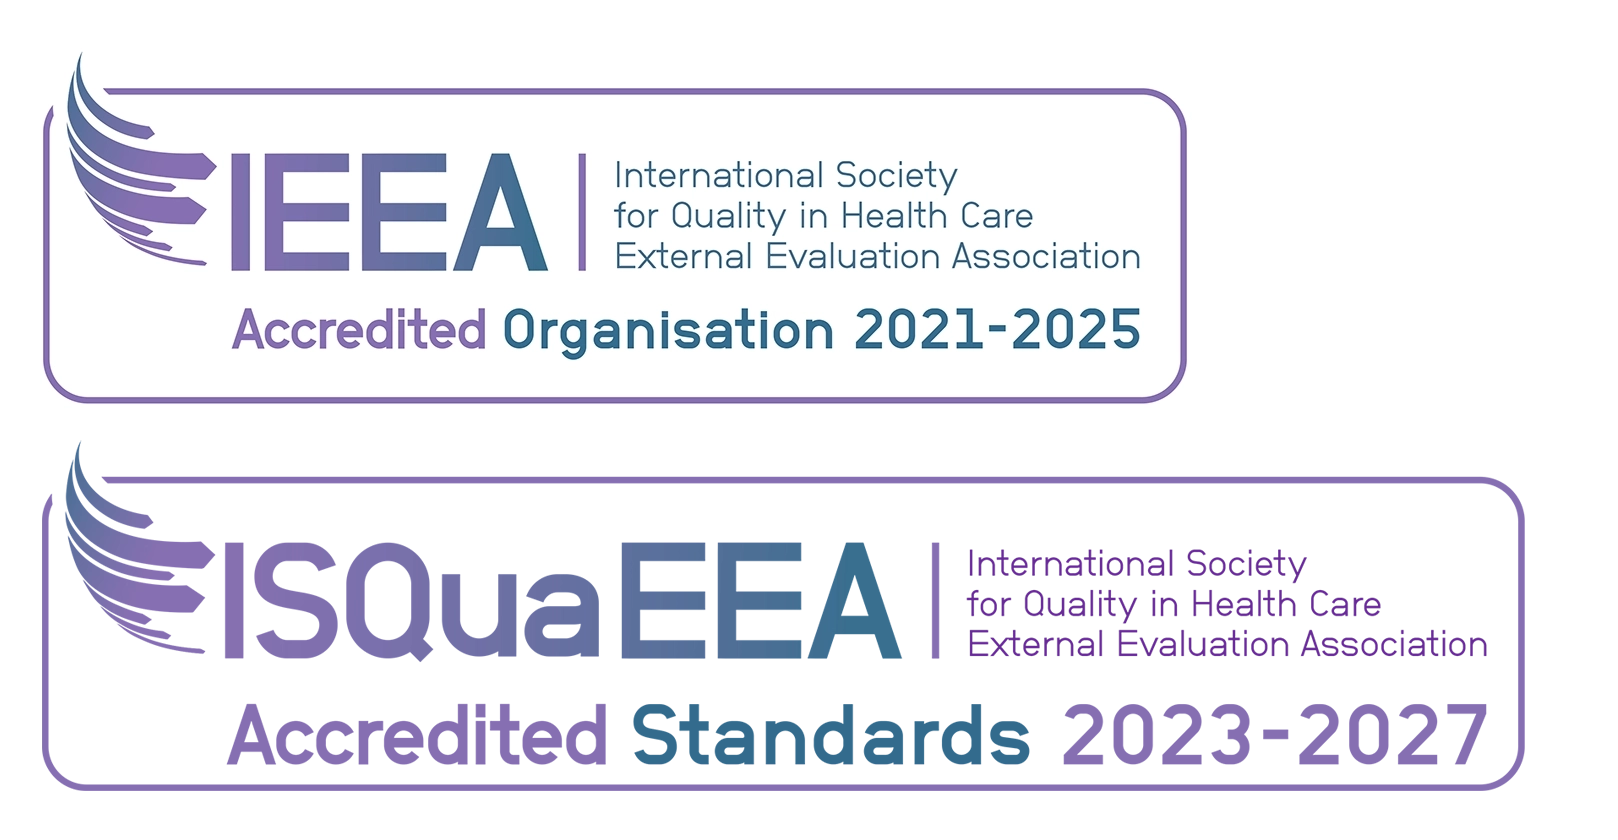 Accredited Standards 2023-2027 - International Society for Quality in Health Care External Evaluation Association